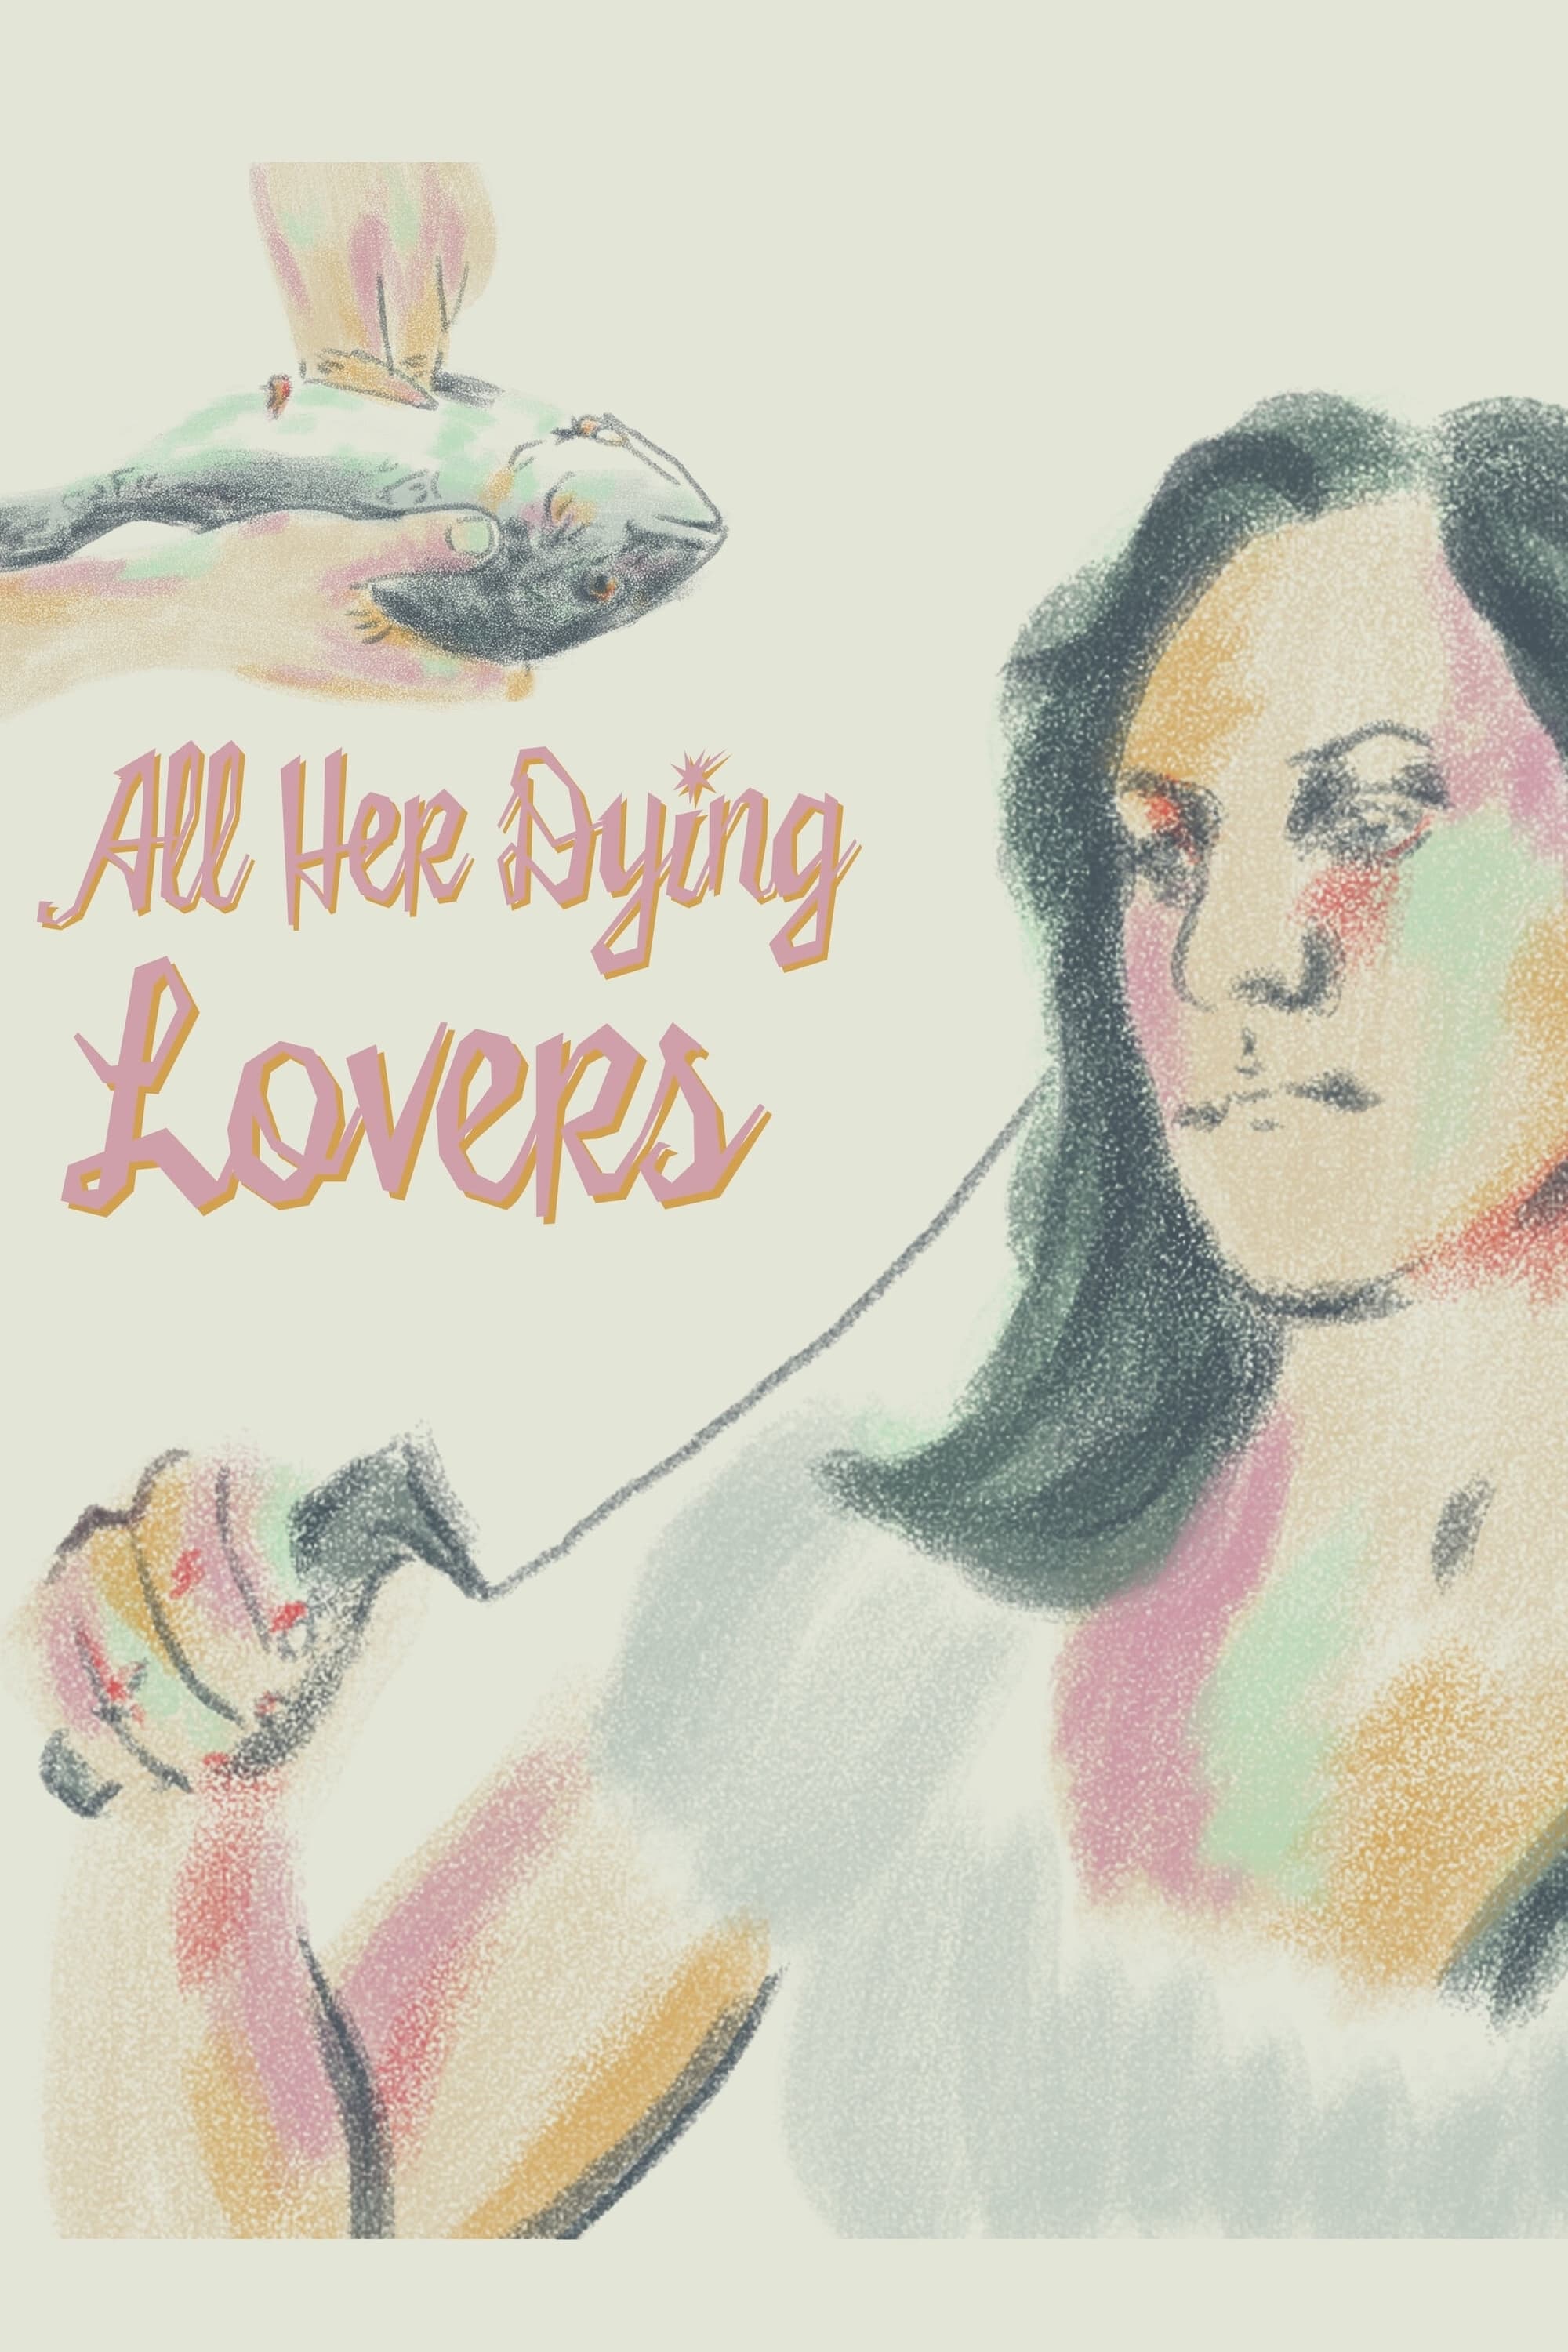 All Her Dying Lovers